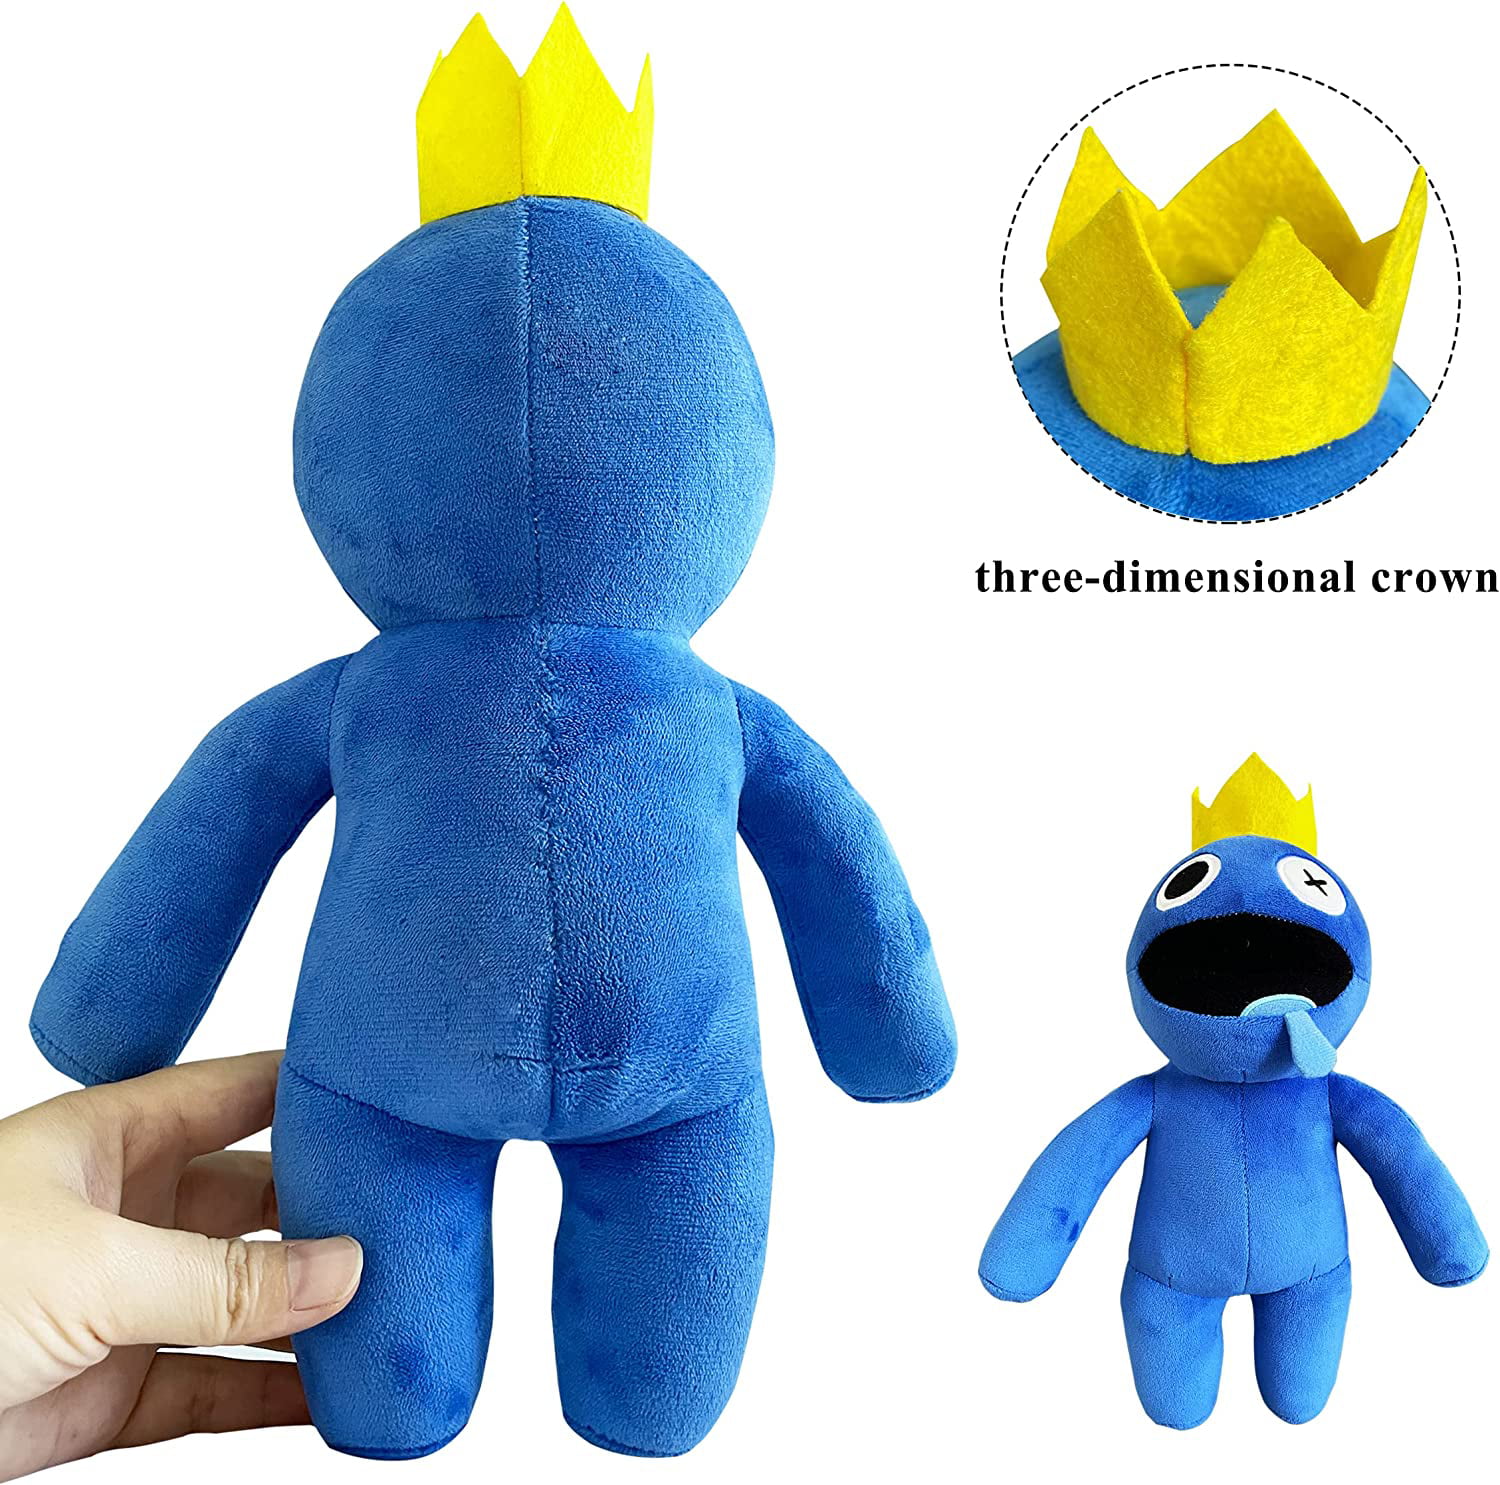 Rainbow Friends Plush, Colorful Plush Toy, Blue Plush Toy, Rainbow Friends,  Christmas Halloween Birthday Party Gifts (red) : Buy Online at Best Price  in KSA - Souq is now : Toys